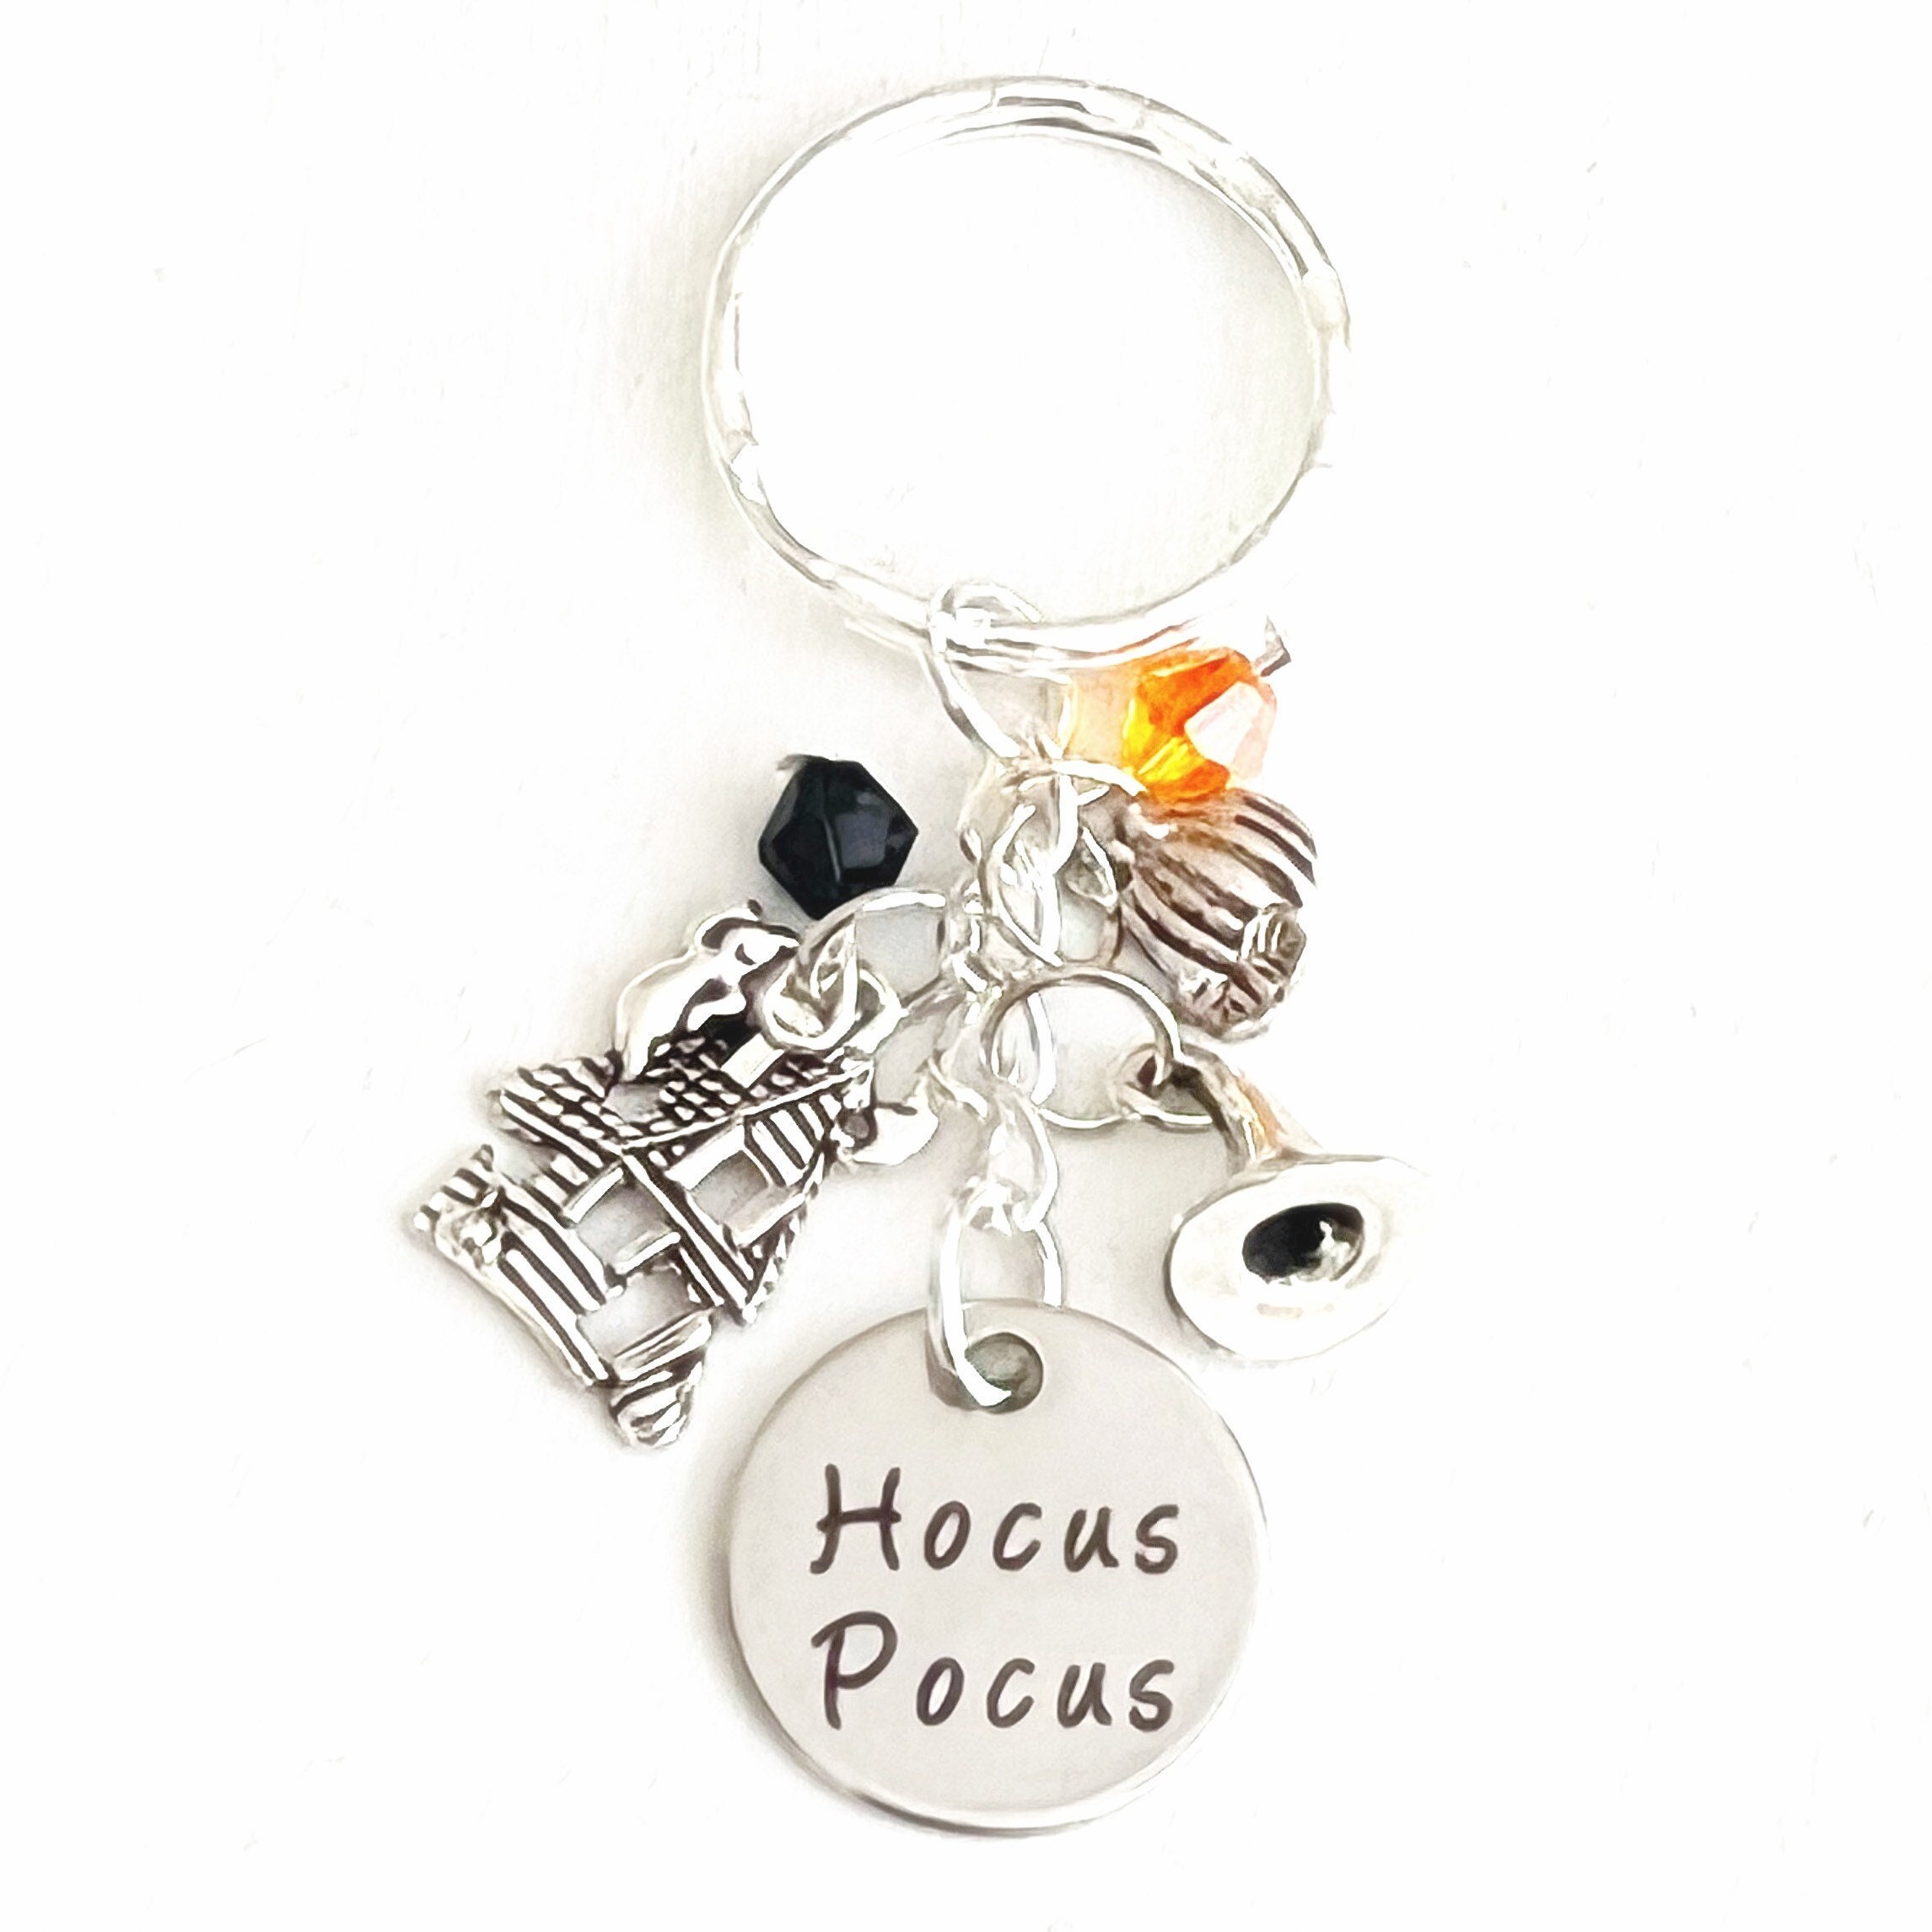 Personalized Hocus Pocus Silver Halloween Charm Keychain Gift and Party  Favor Haunted House Accessories